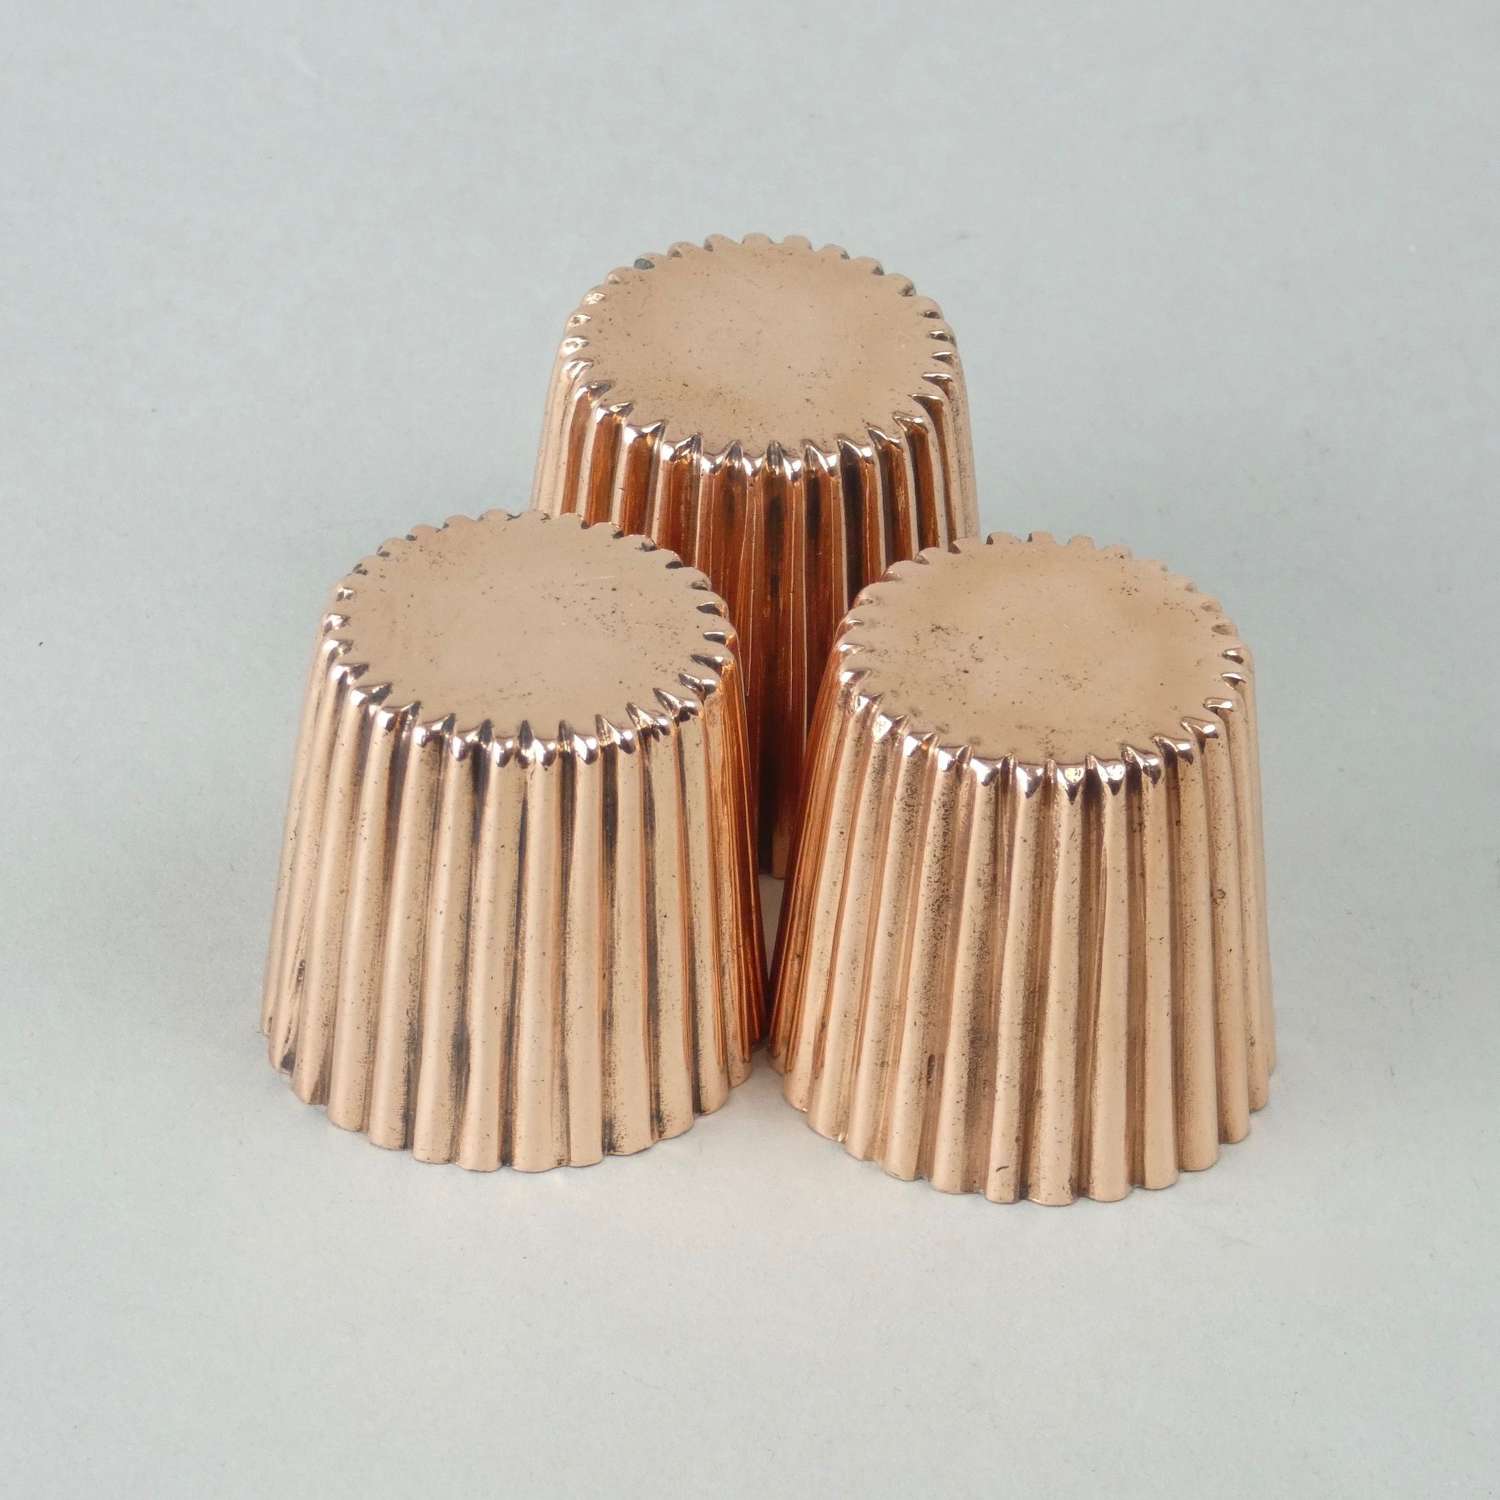 Miniature fluted dariole moulds